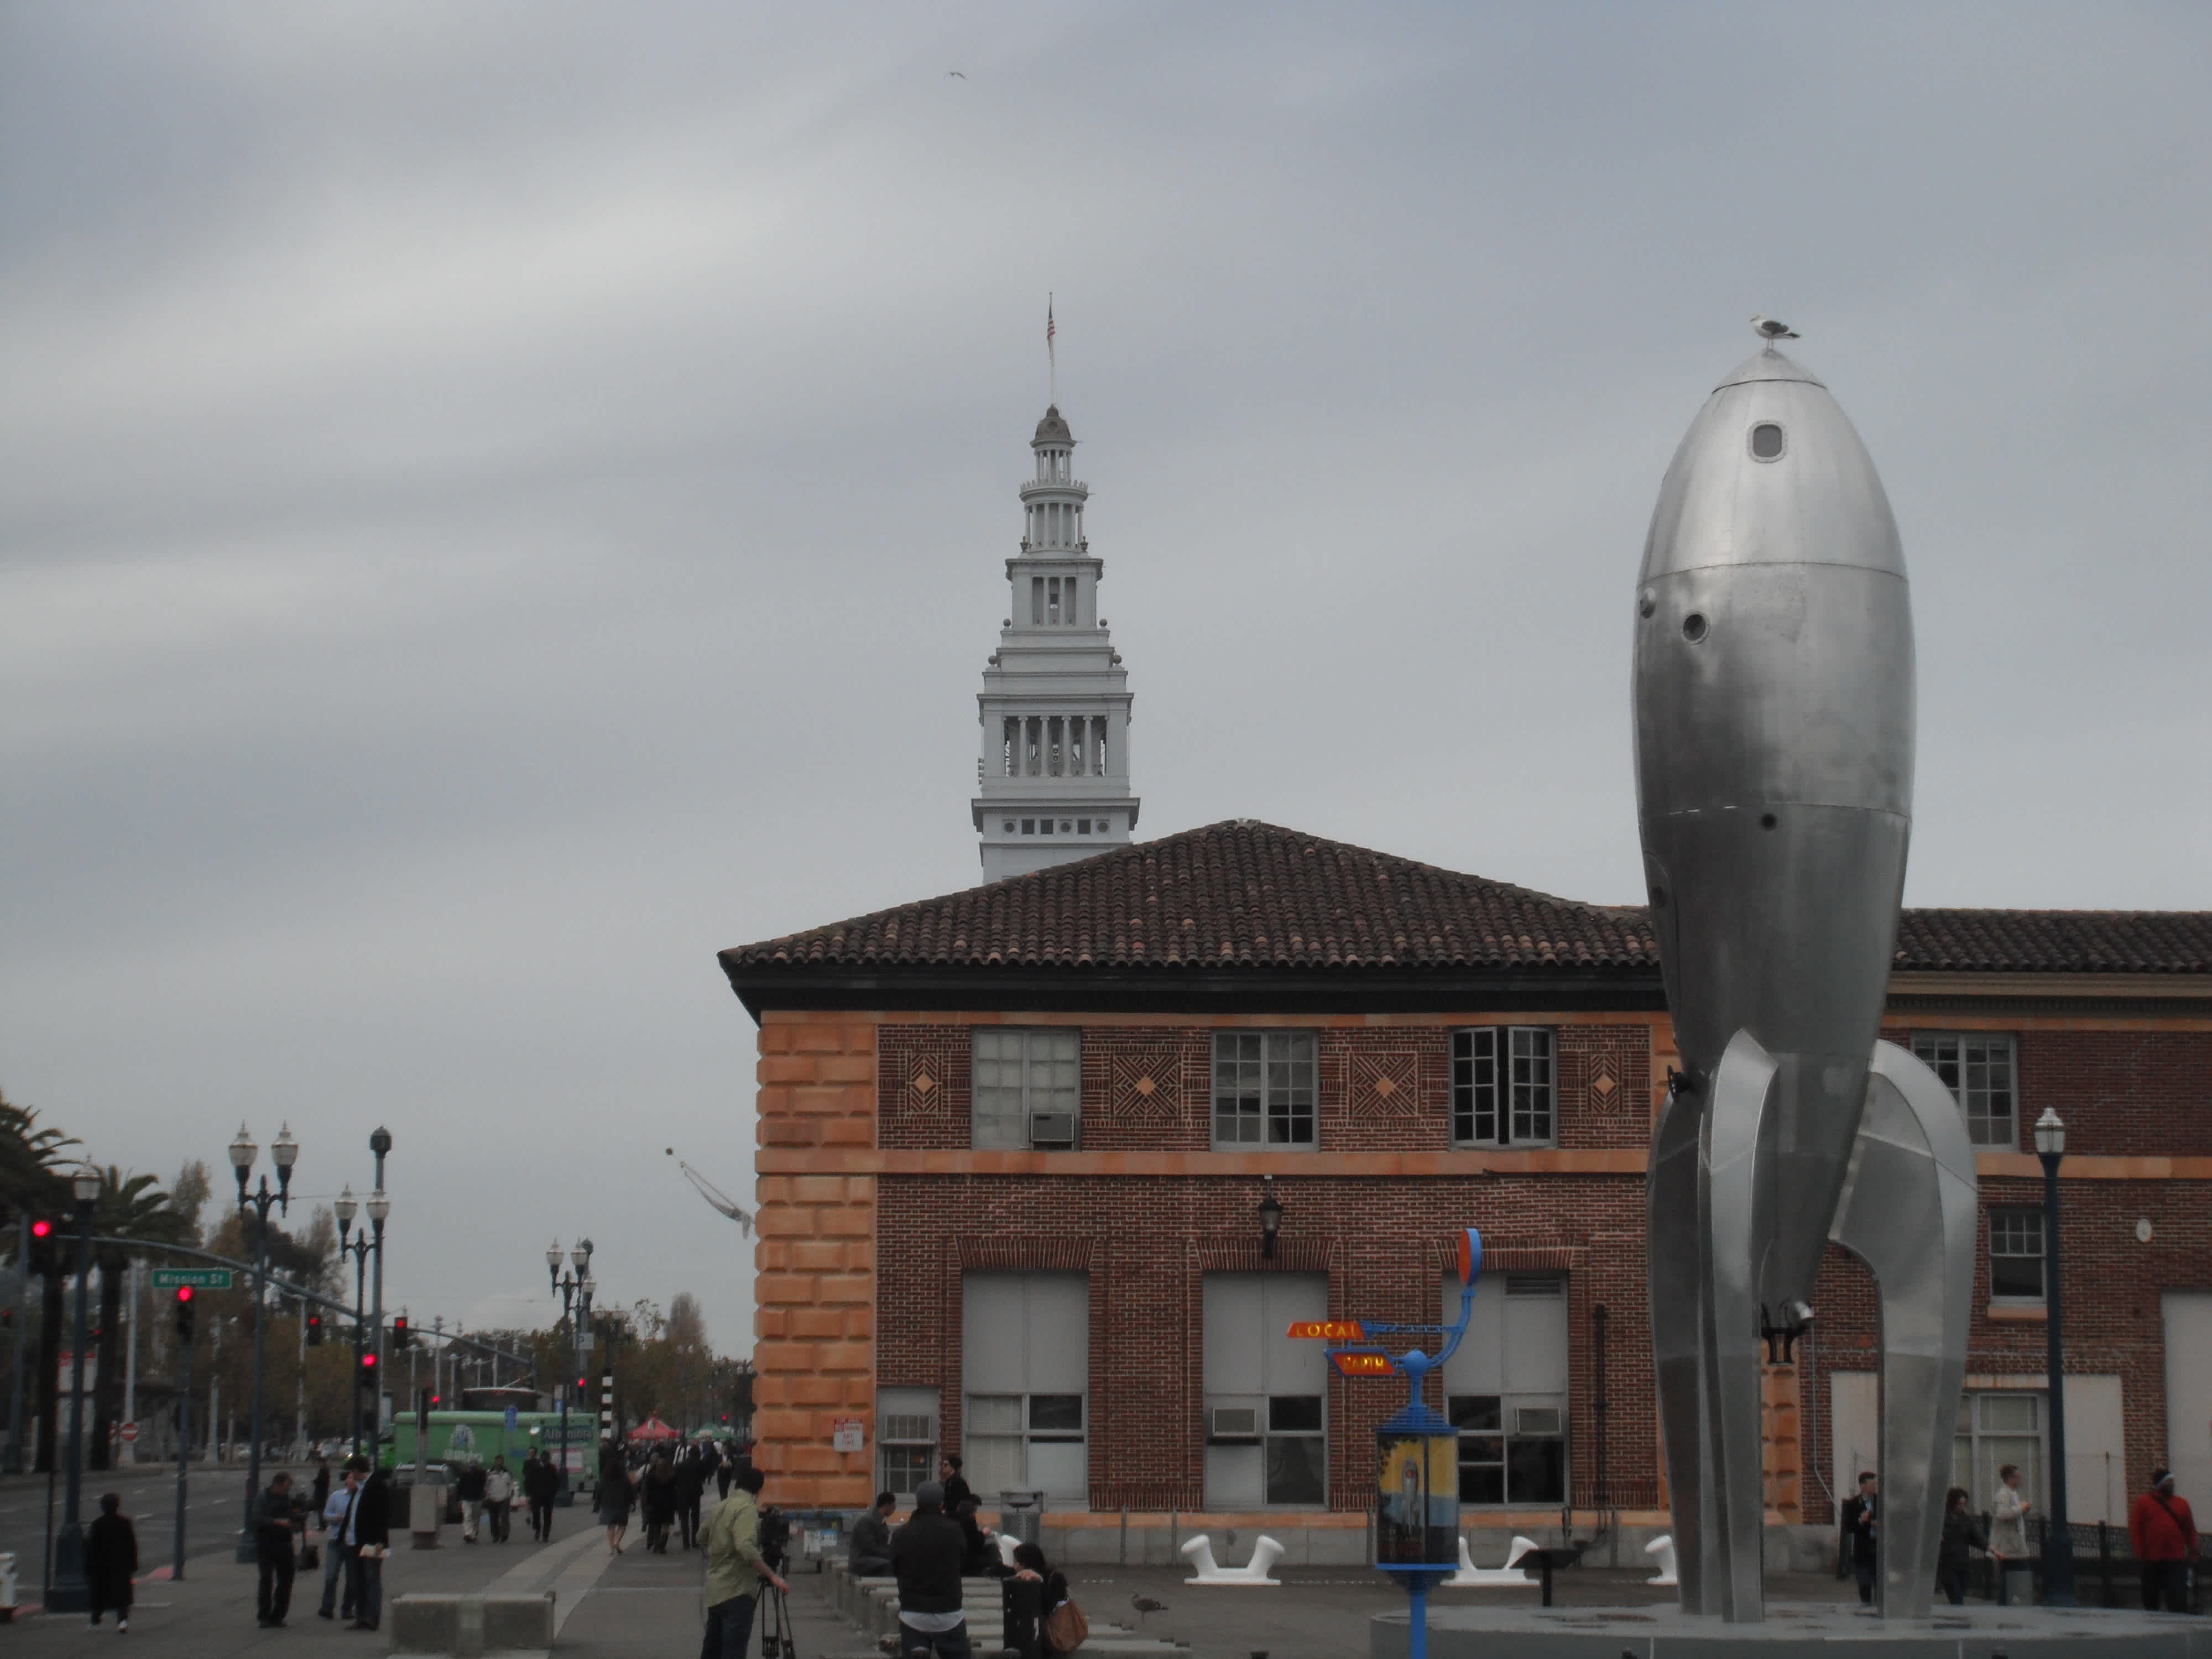 Brick building with metallic rocket ship statue in front at Ferry Building, San Francisco, California. 